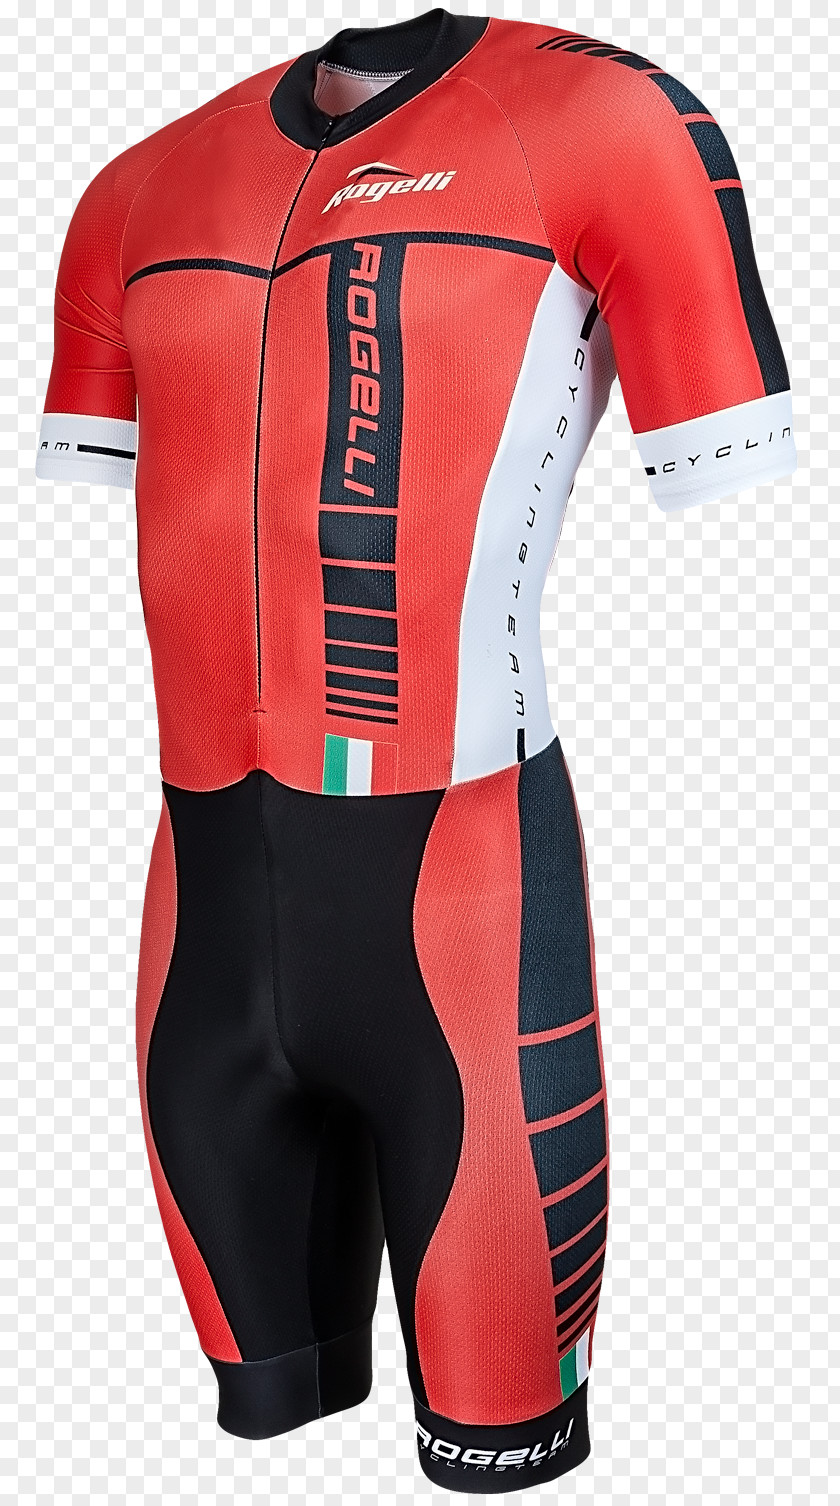 Spandex Clothing Sleeve Wetsuit Motorcycle PNG